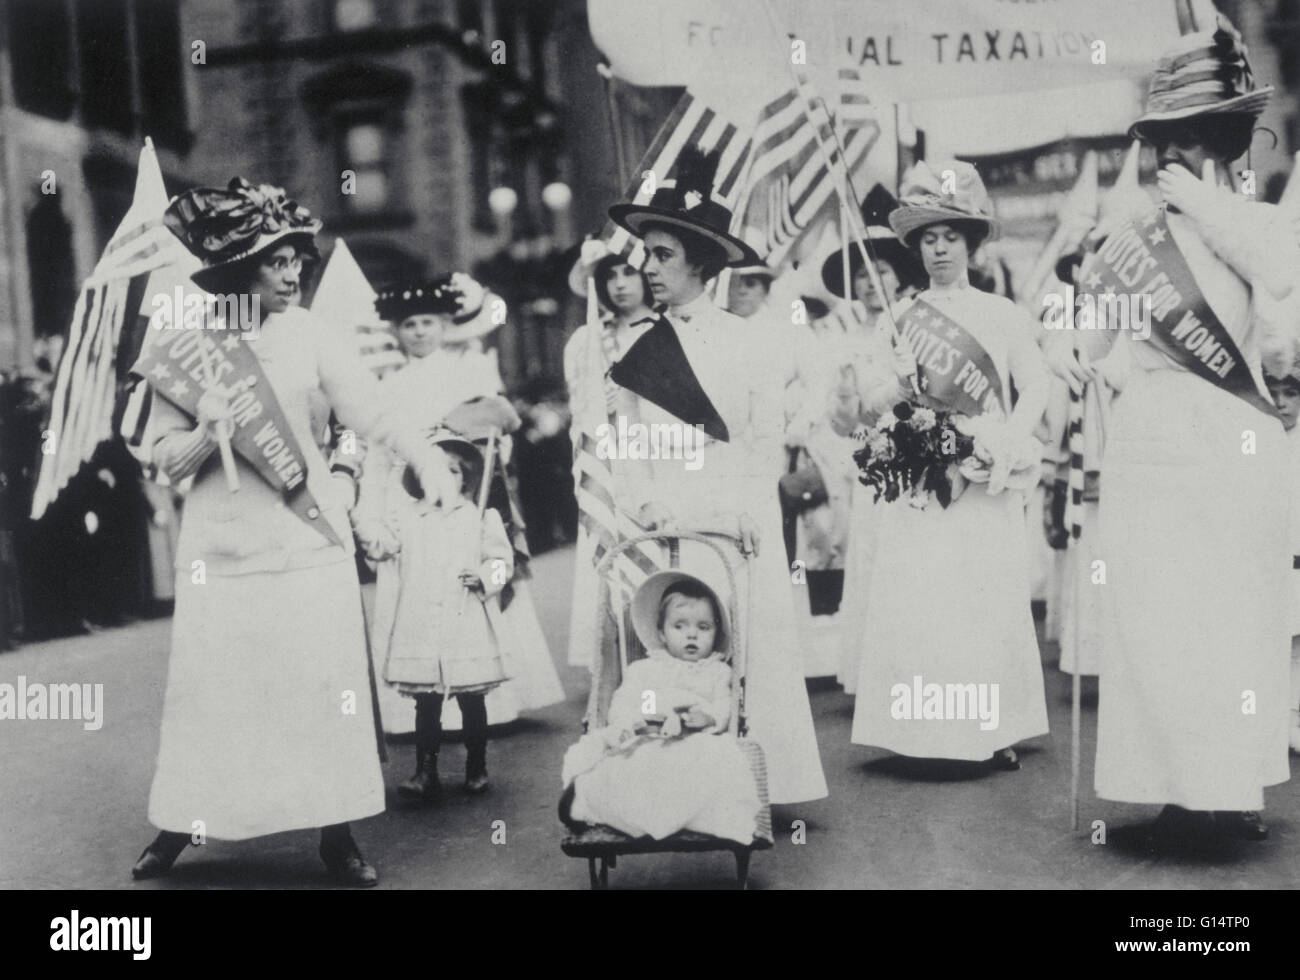 Suffragists parade, New York City, 1912. American women had sought the right to vote since the mid 19th century, yet were not allowed to vote until 1920, when the required number of states ratified the 19th Amendment to the Constitution. Stock Photo